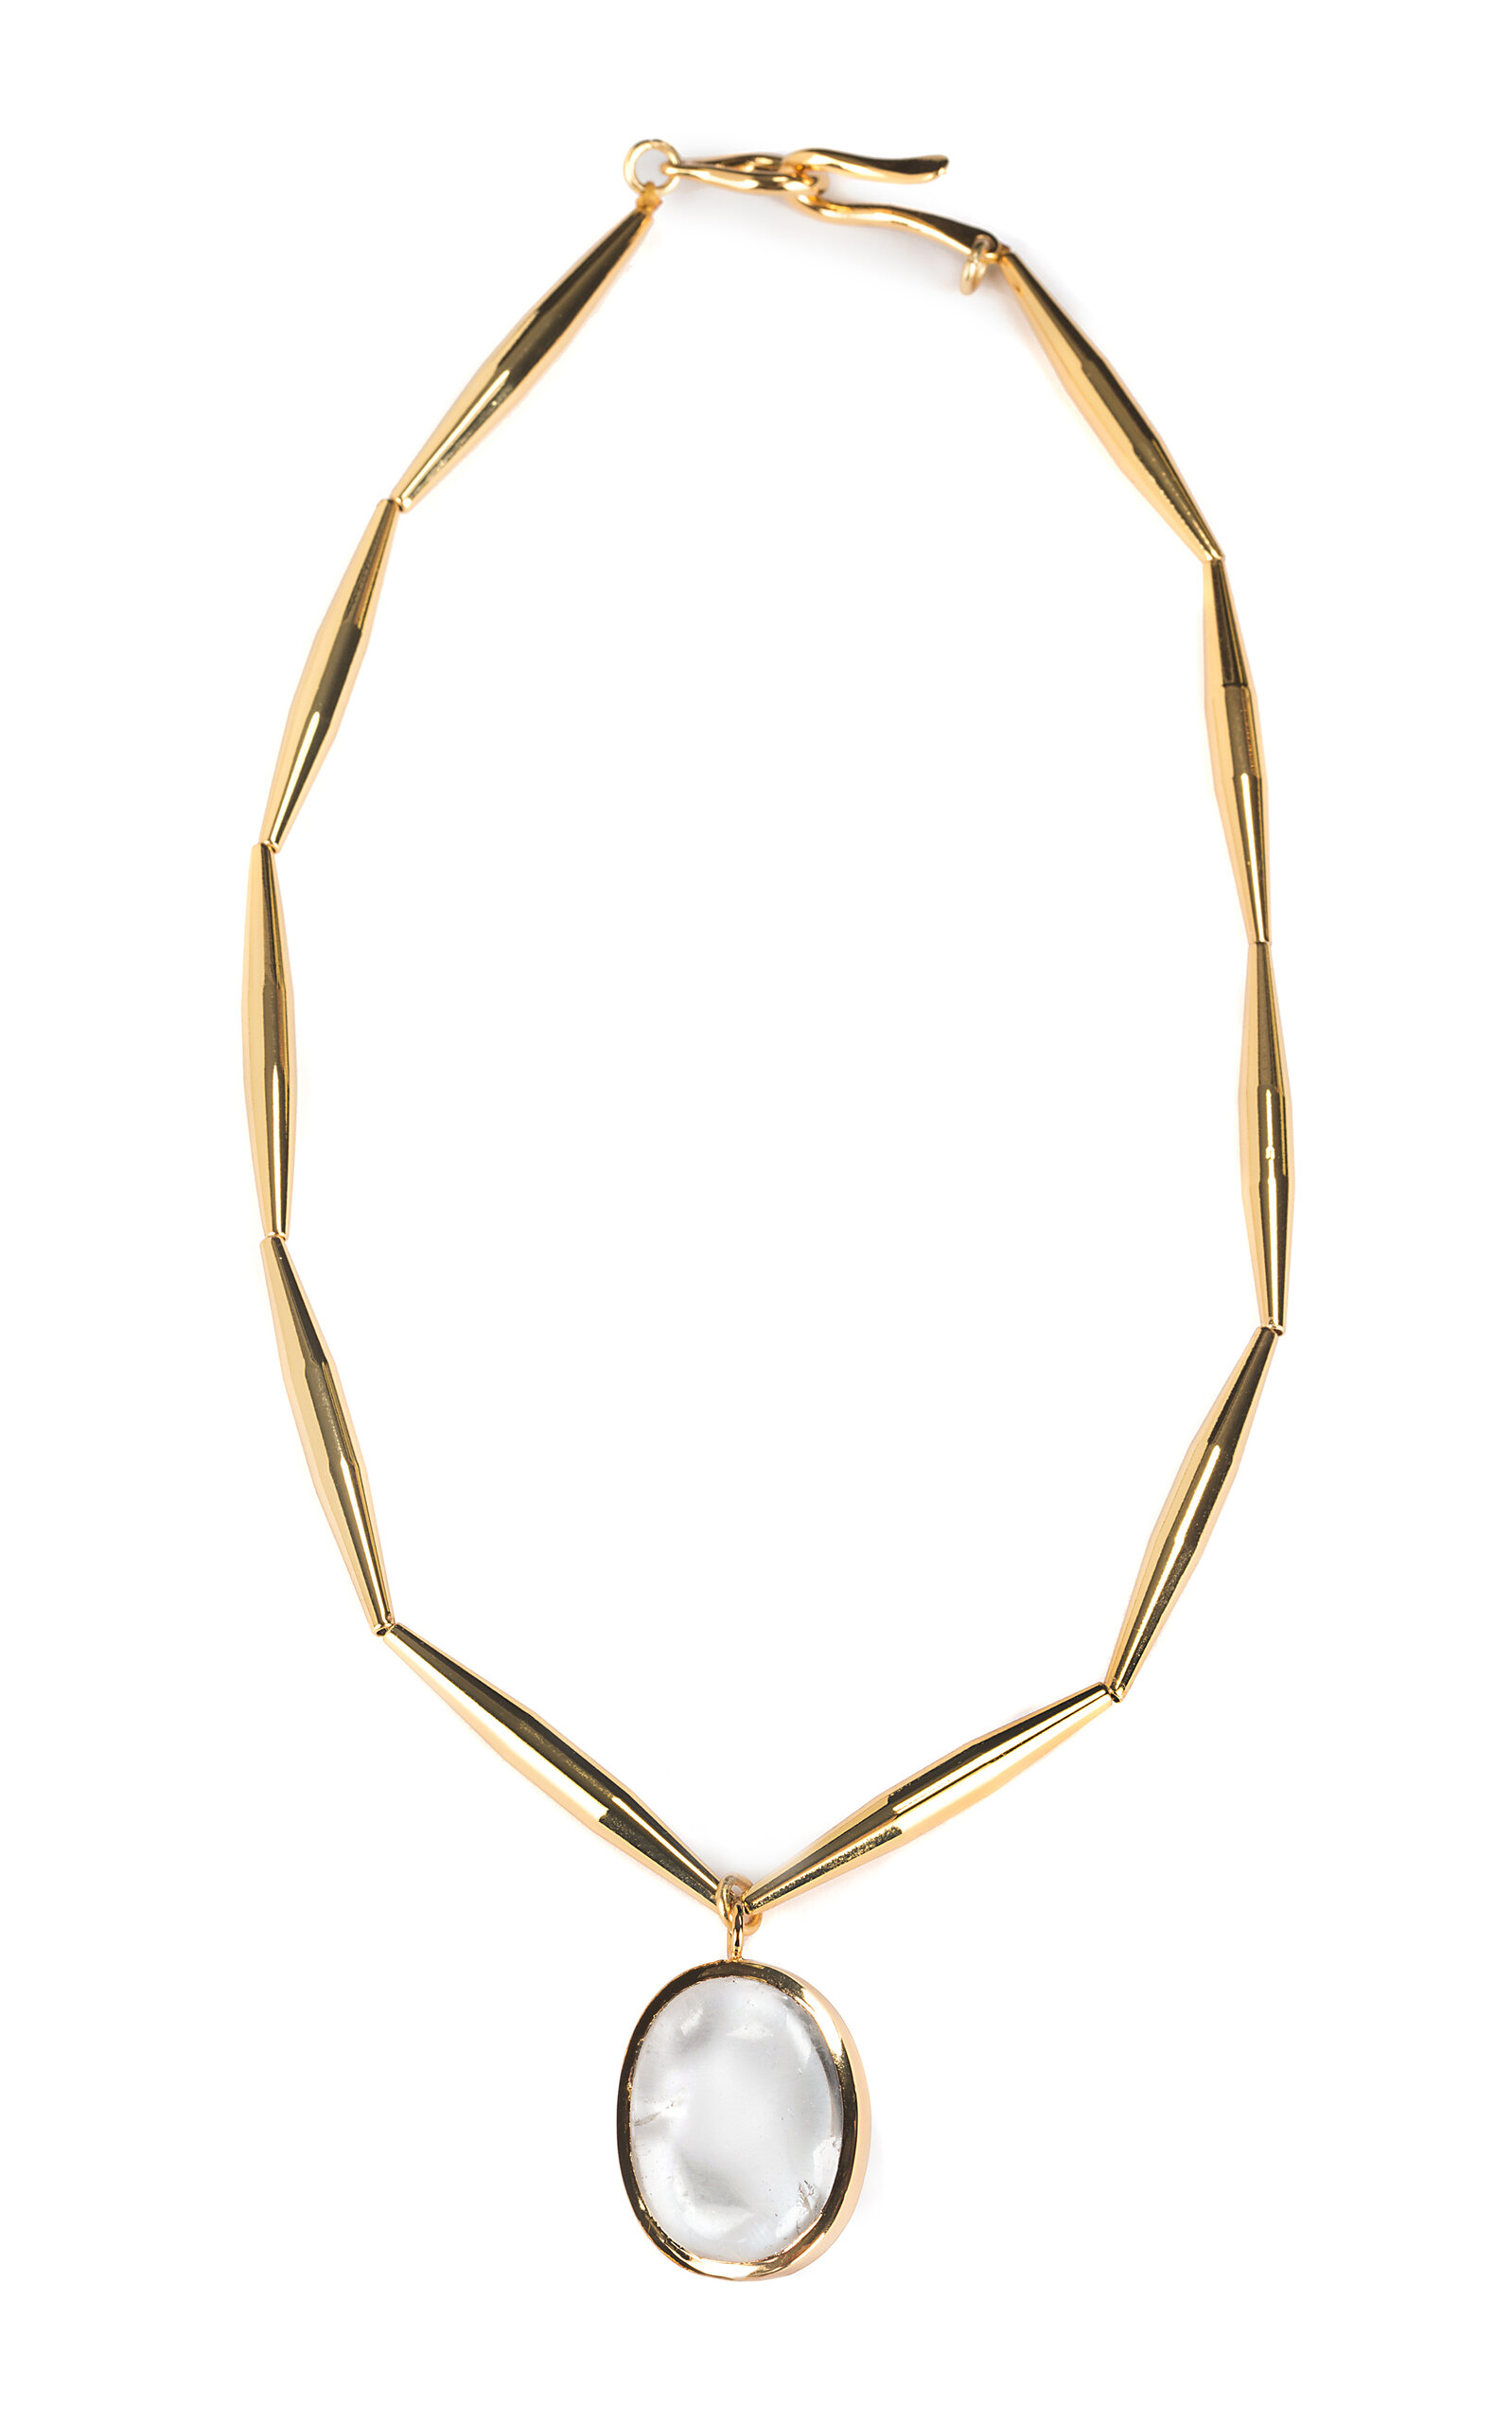 Lumia Theia 24k Gold-Plated Crystal Pendant Necklace